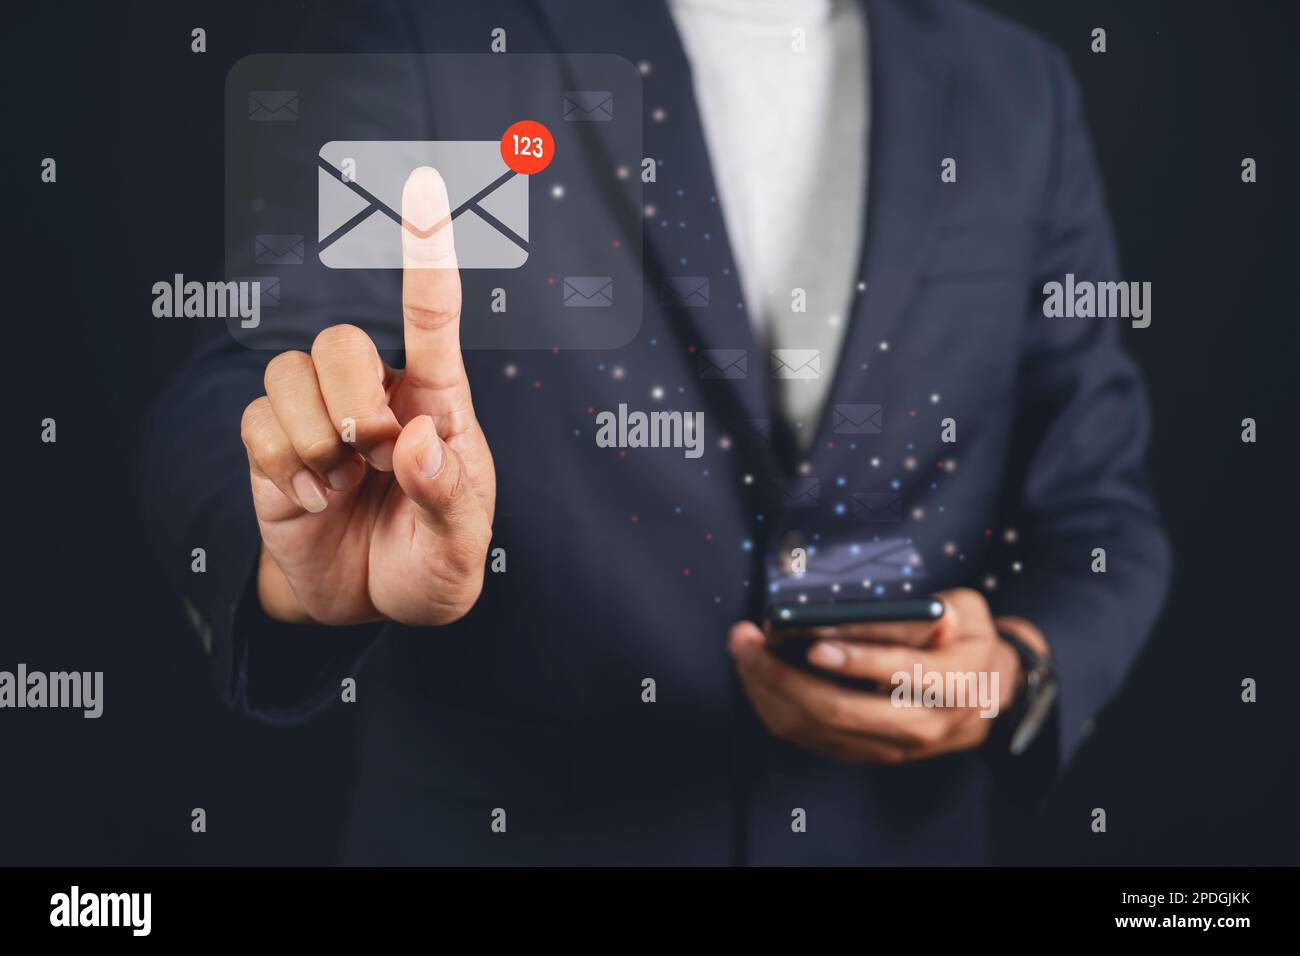 Businessman touching email on virtual screen. electronic message. Email notification concept. Stock Photo